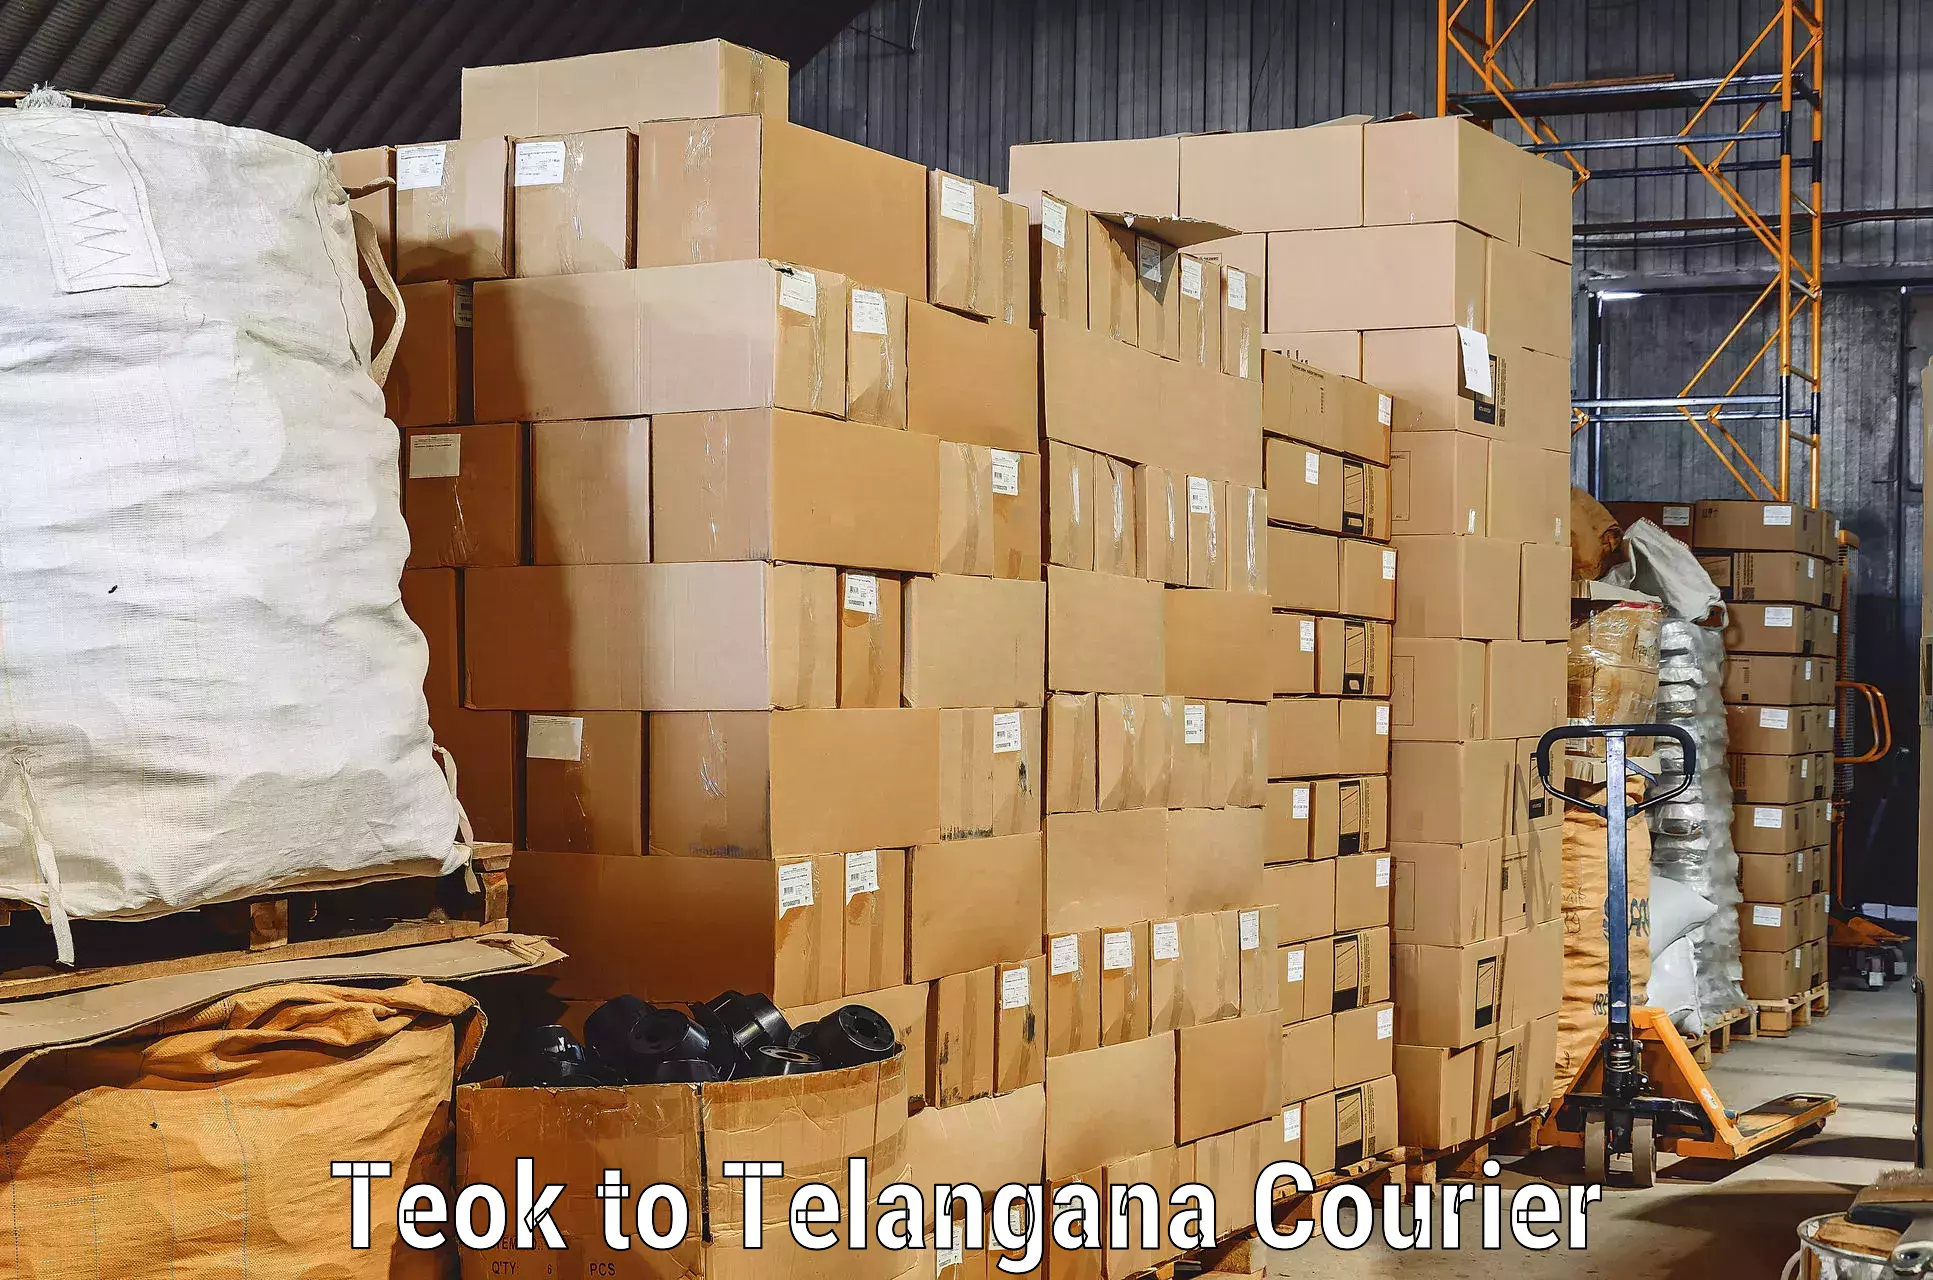 Household logistics services in Teok to Rudrangi